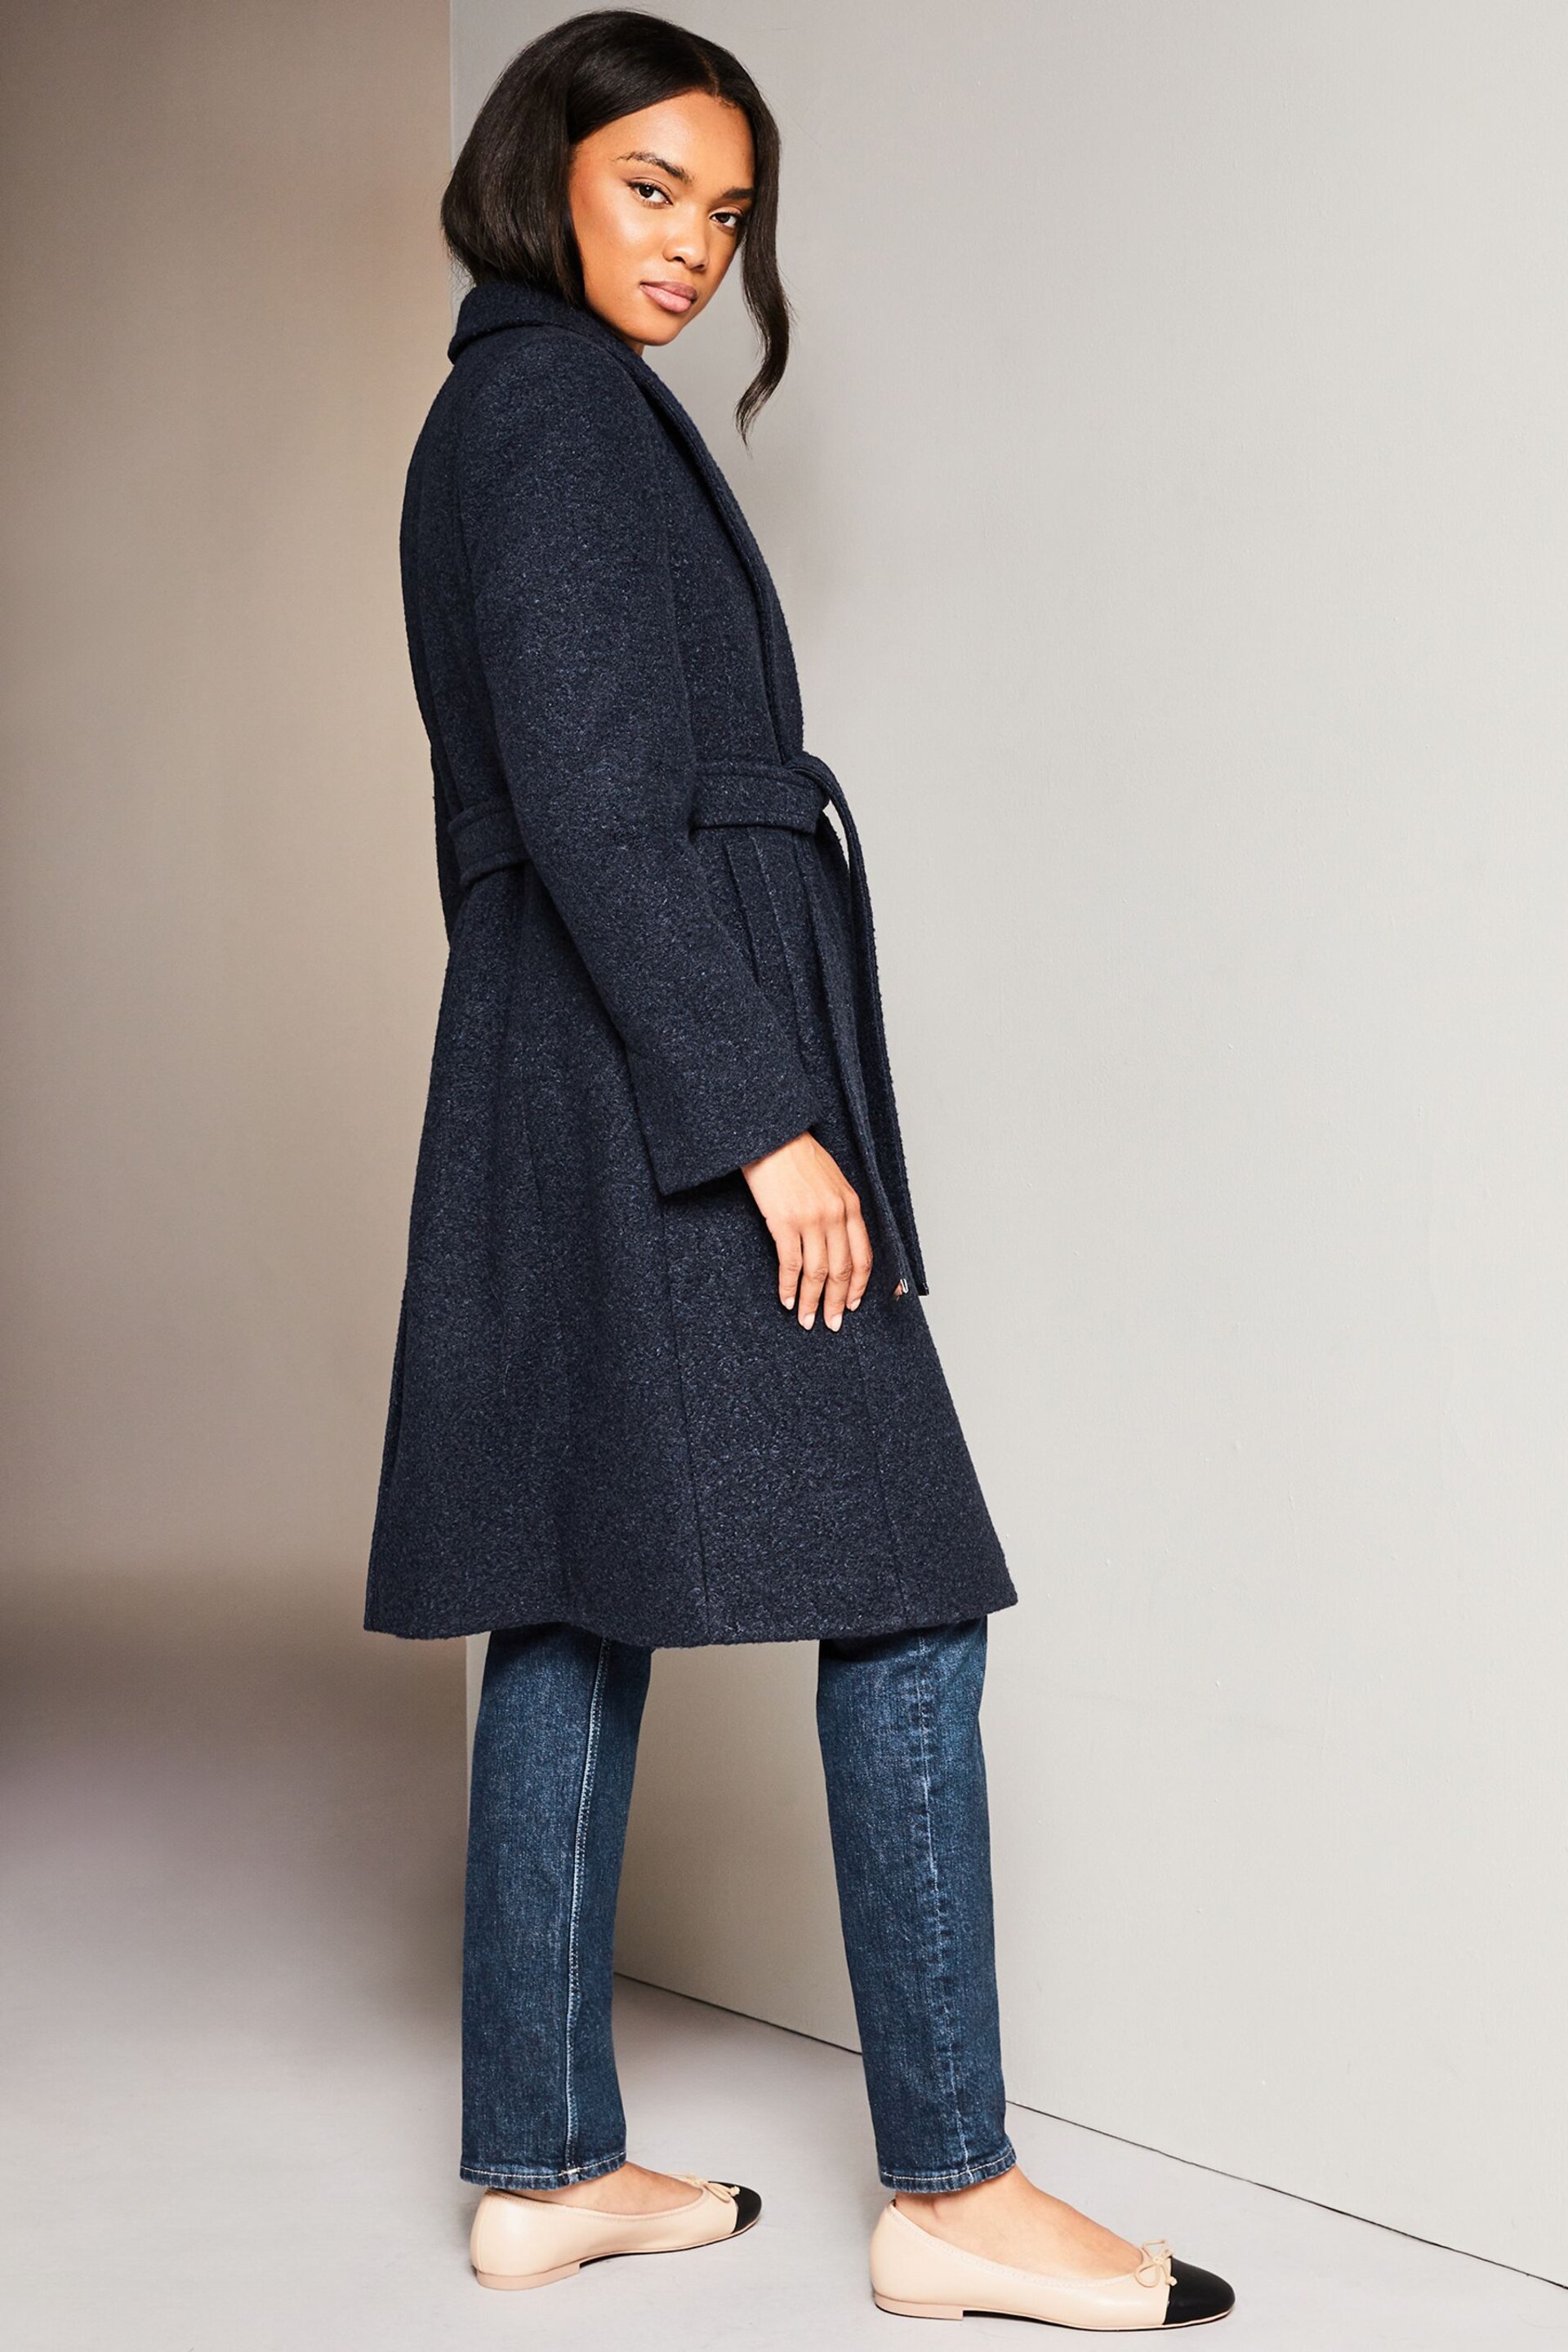 Lipsy Navy Blue Relaxed Belted Boucle Smart Wrap Trench Coat - Image 3 of 4